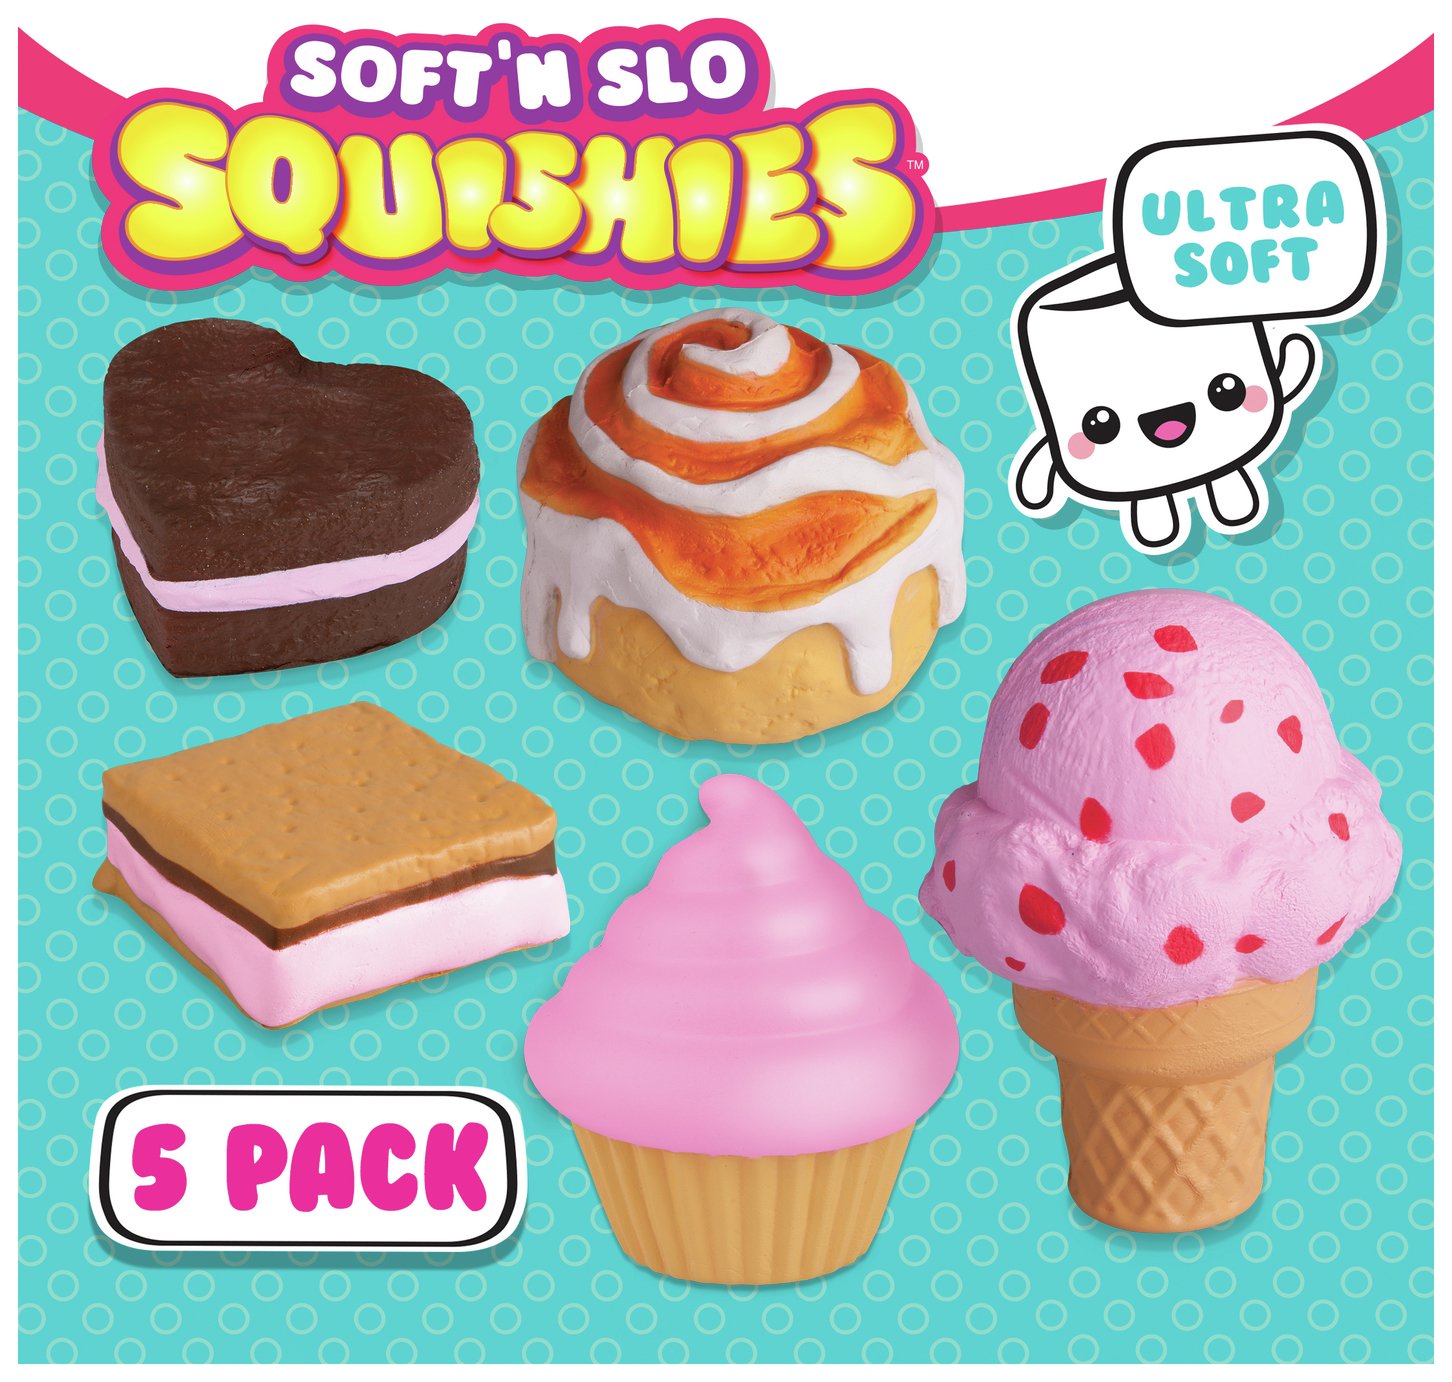 Soft N Slo Squishies 5 Pack Reviews 